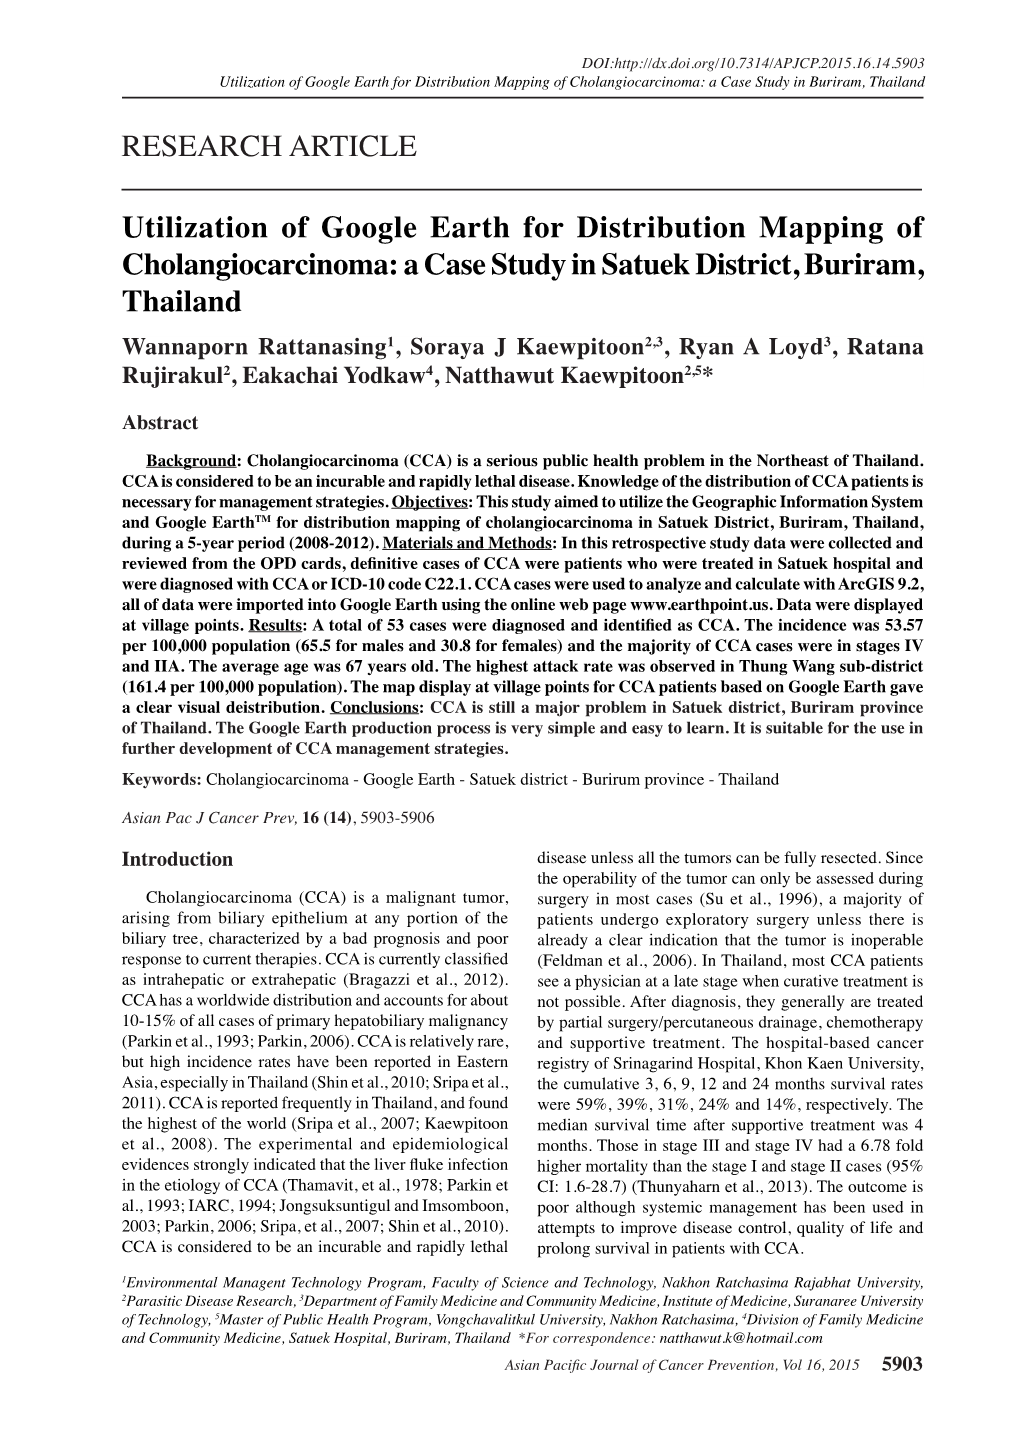 Utilization of Google Earth for Distribution Mapping of Cholangiocarcinoma: a Case Study in Satuek District, Buriram, Thailand